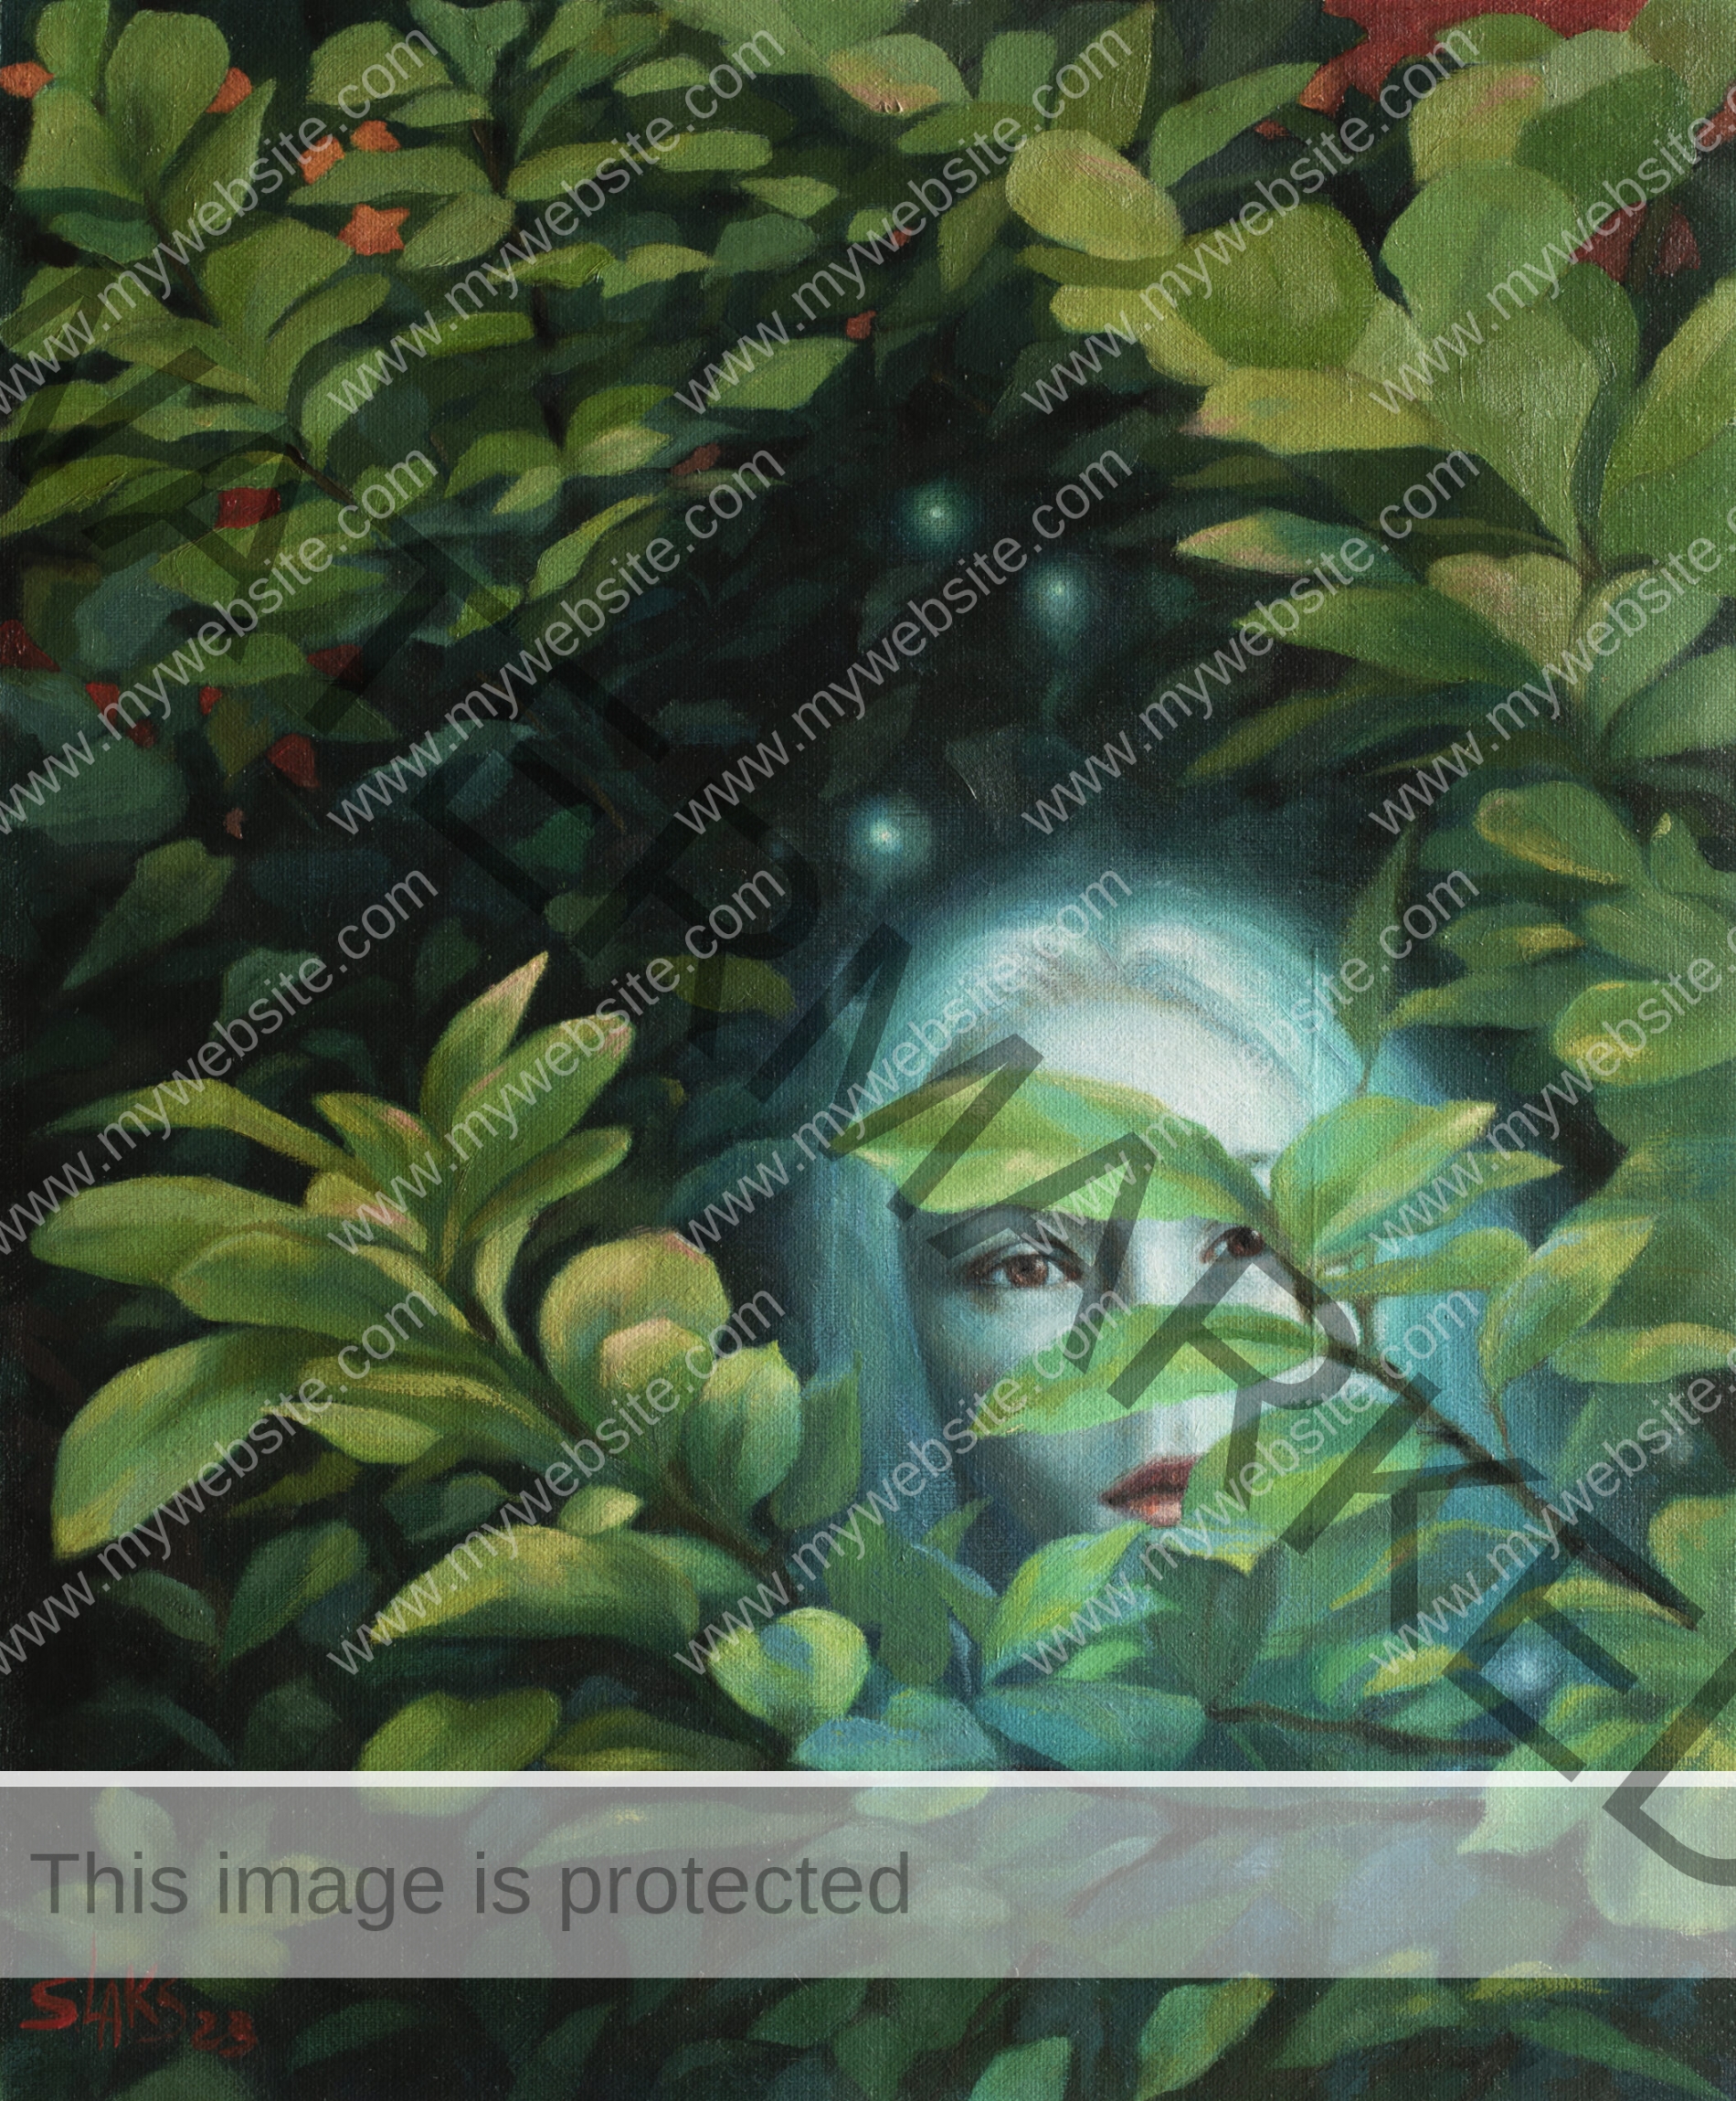 magical elf painting by Sylvia Laks, featuring a glowing elf woman emerging from the foliage. It's enchanting, evoking feelings of mystery and wonder.